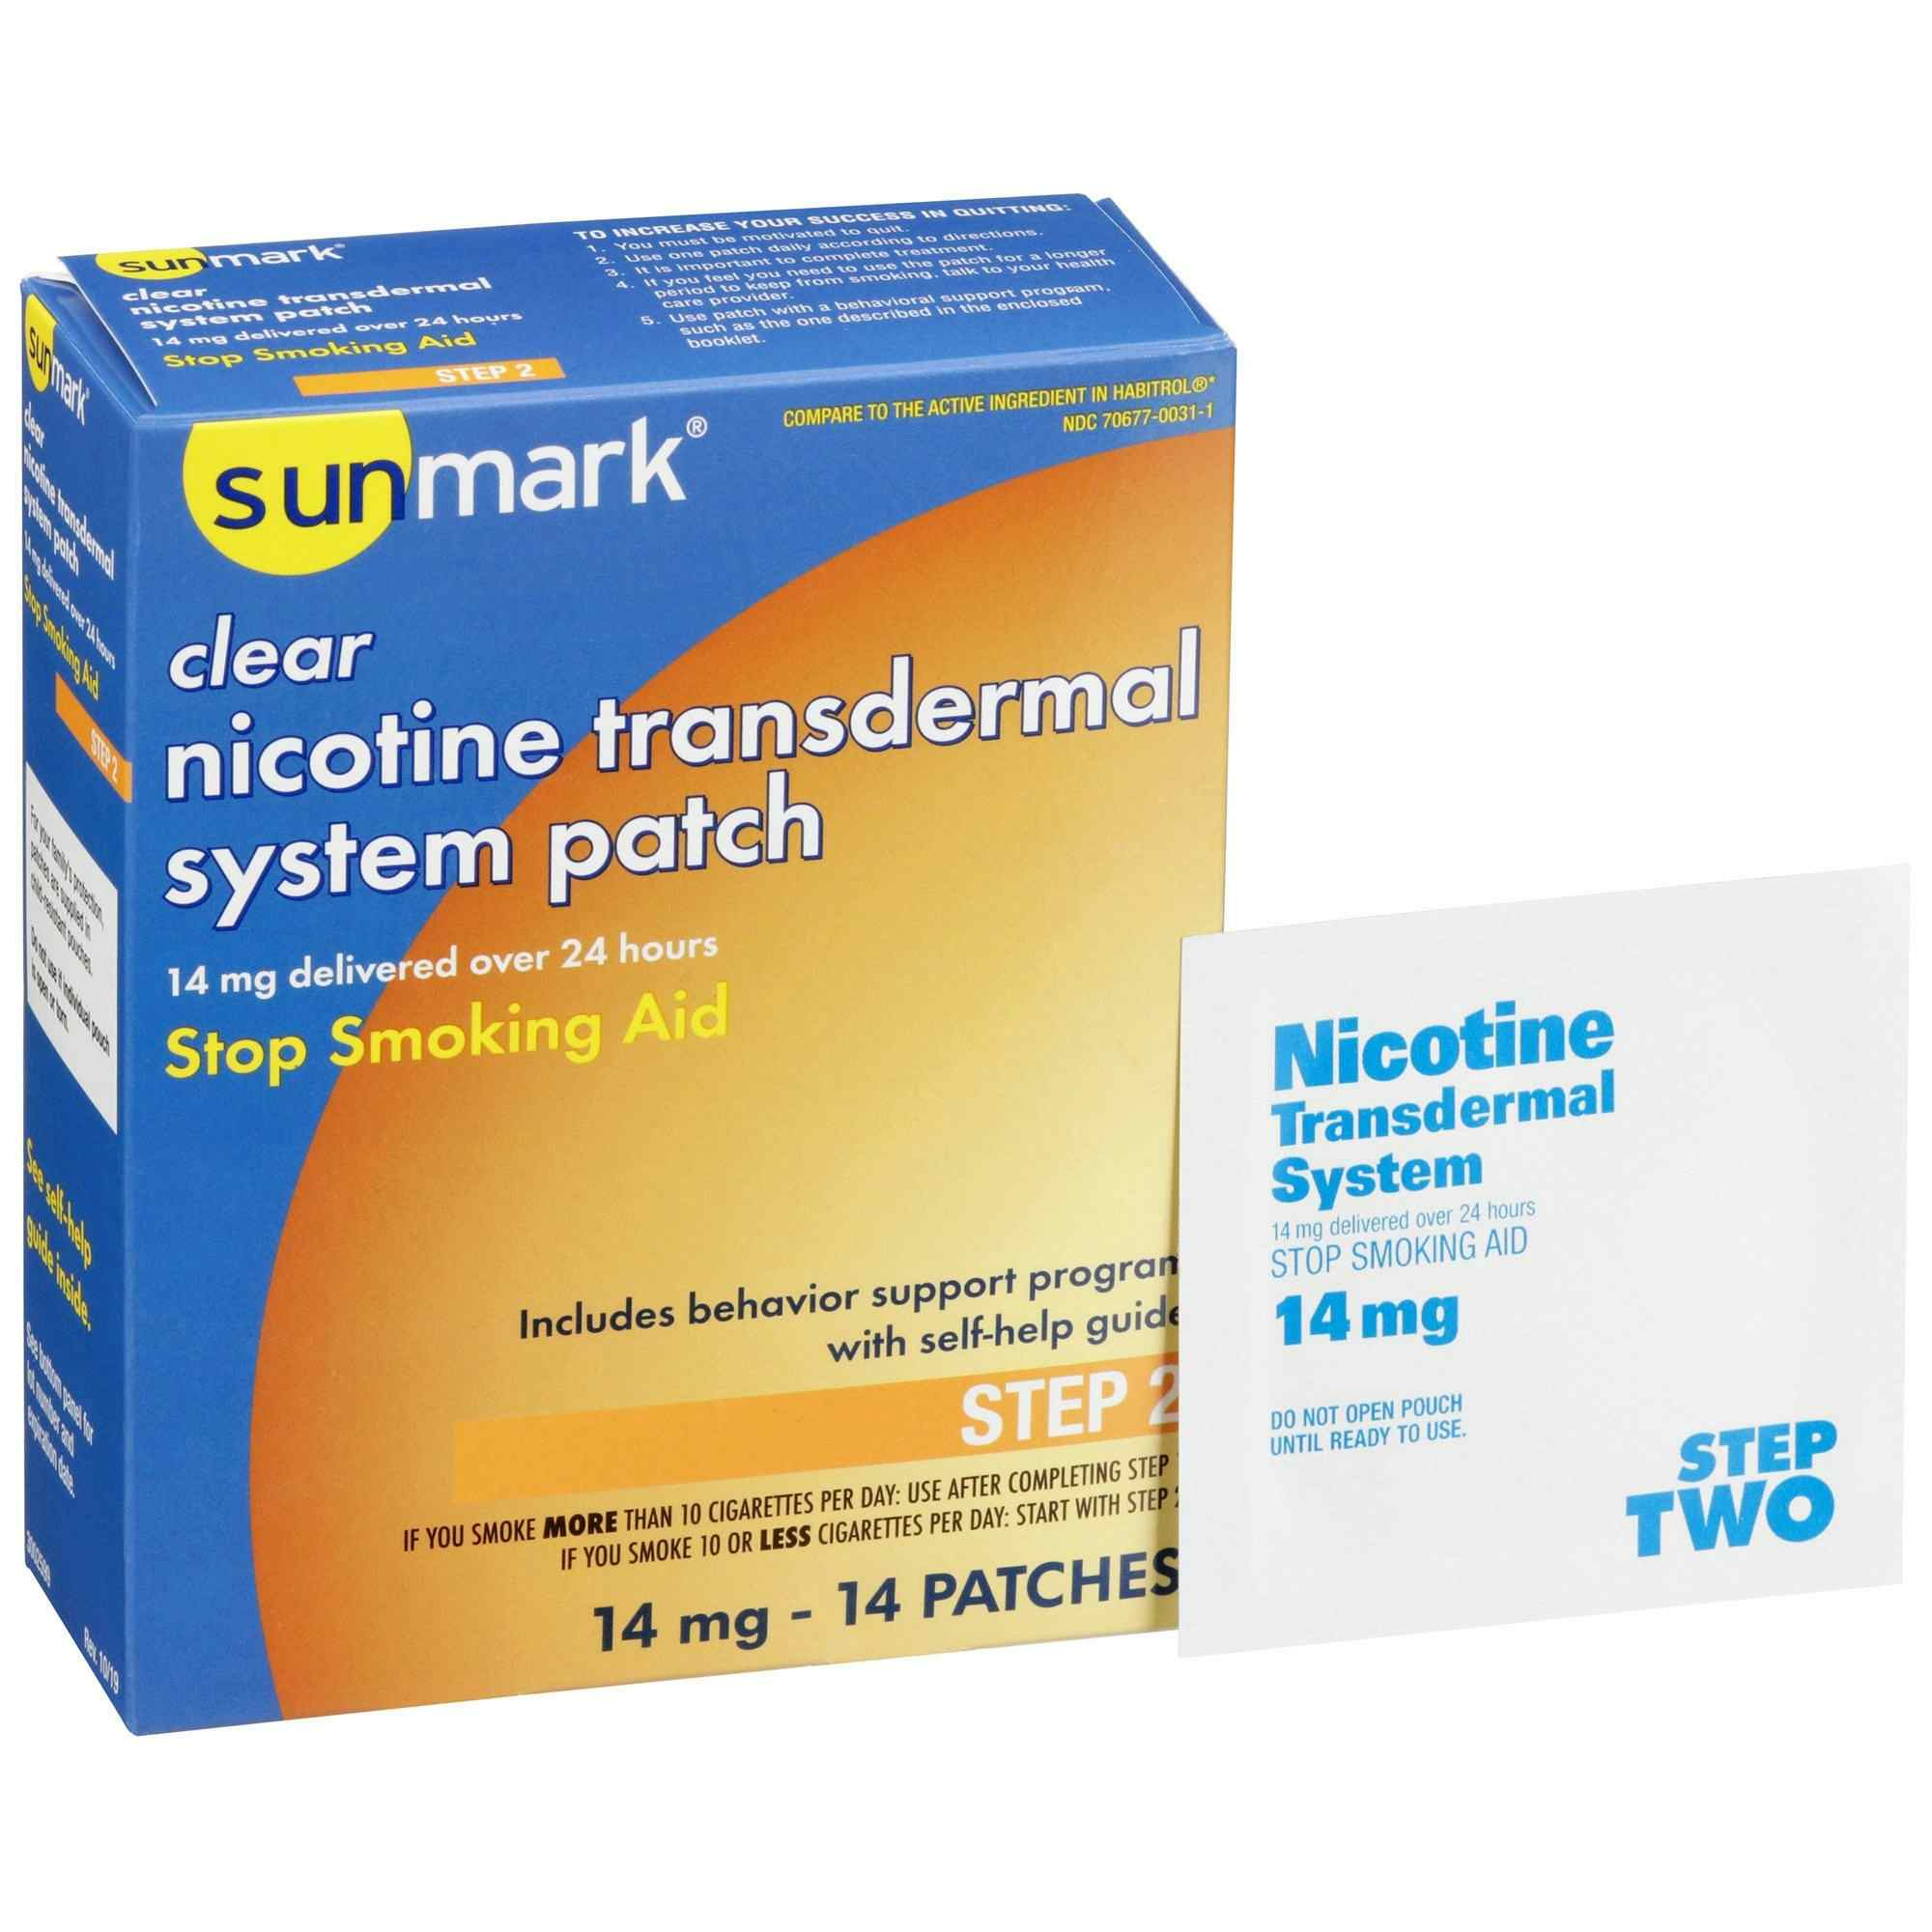 Sunmark Clear Nicotine Transdermal System Patch Stop Smoking Aid, 14 mg, 70677003101, Box of 14